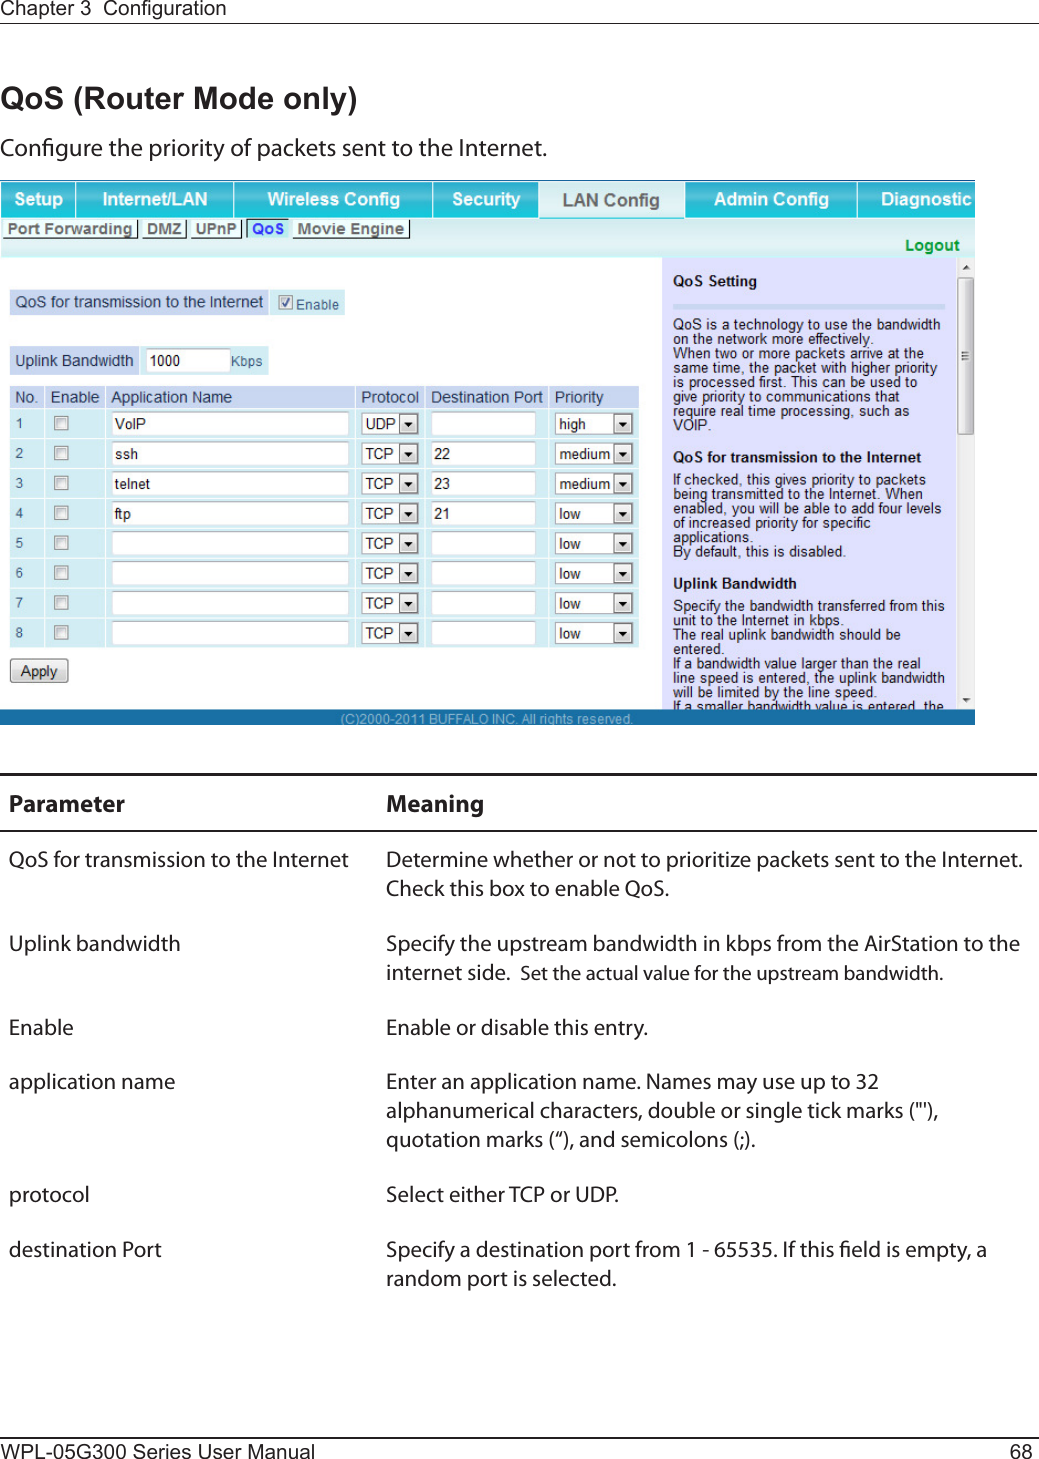 WPL-05G300 Series User Manual 68Chapter 3  CongurationQoS (Router Mode only)Congure the priority of packets sent to the Internet.Parameter MeaningQoS for transmission to the Internet Determine whether or not to prioritize packets sent to the Internet. Check this box to enable QoS.Uplink bandwidth Specify the upstream bandwidth in kbps from the AirStation to the internet side.  Set the actual value for the upstream bandwidth.Enable Enable or disable this entry.application name Enter an application name. Names may use up to 32 alphanumerical characters, double or single tick marks (&quot;&apos;), quotation marks (“), and semicolons (;).protocol Select either TCP or UDP.destination Port Specify a destination port from 1 - 65535. If this eld is empty, a random port is selected.